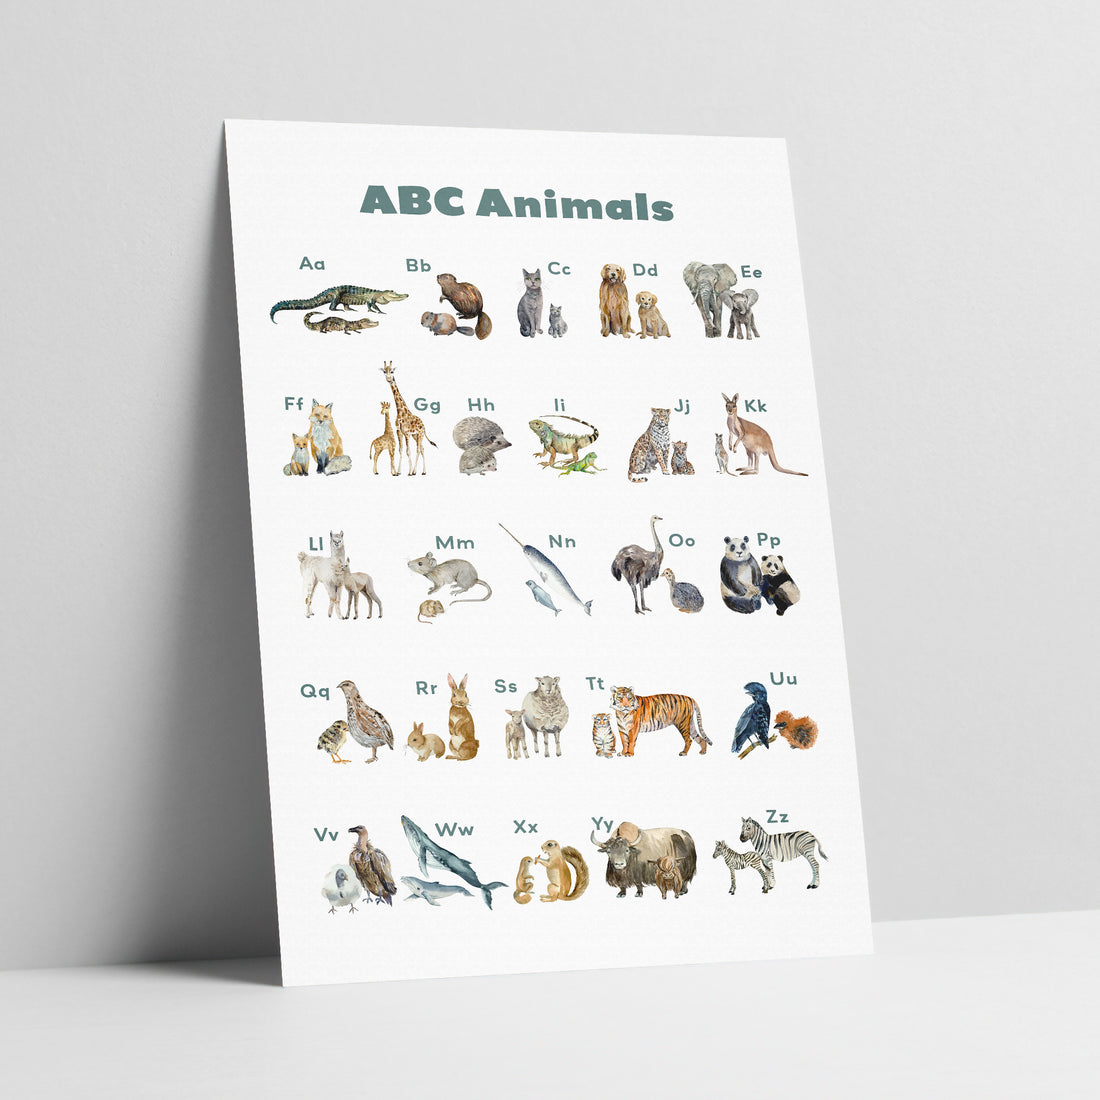 Copy of ABC Animals - Educational ABC Poster without Animal Names